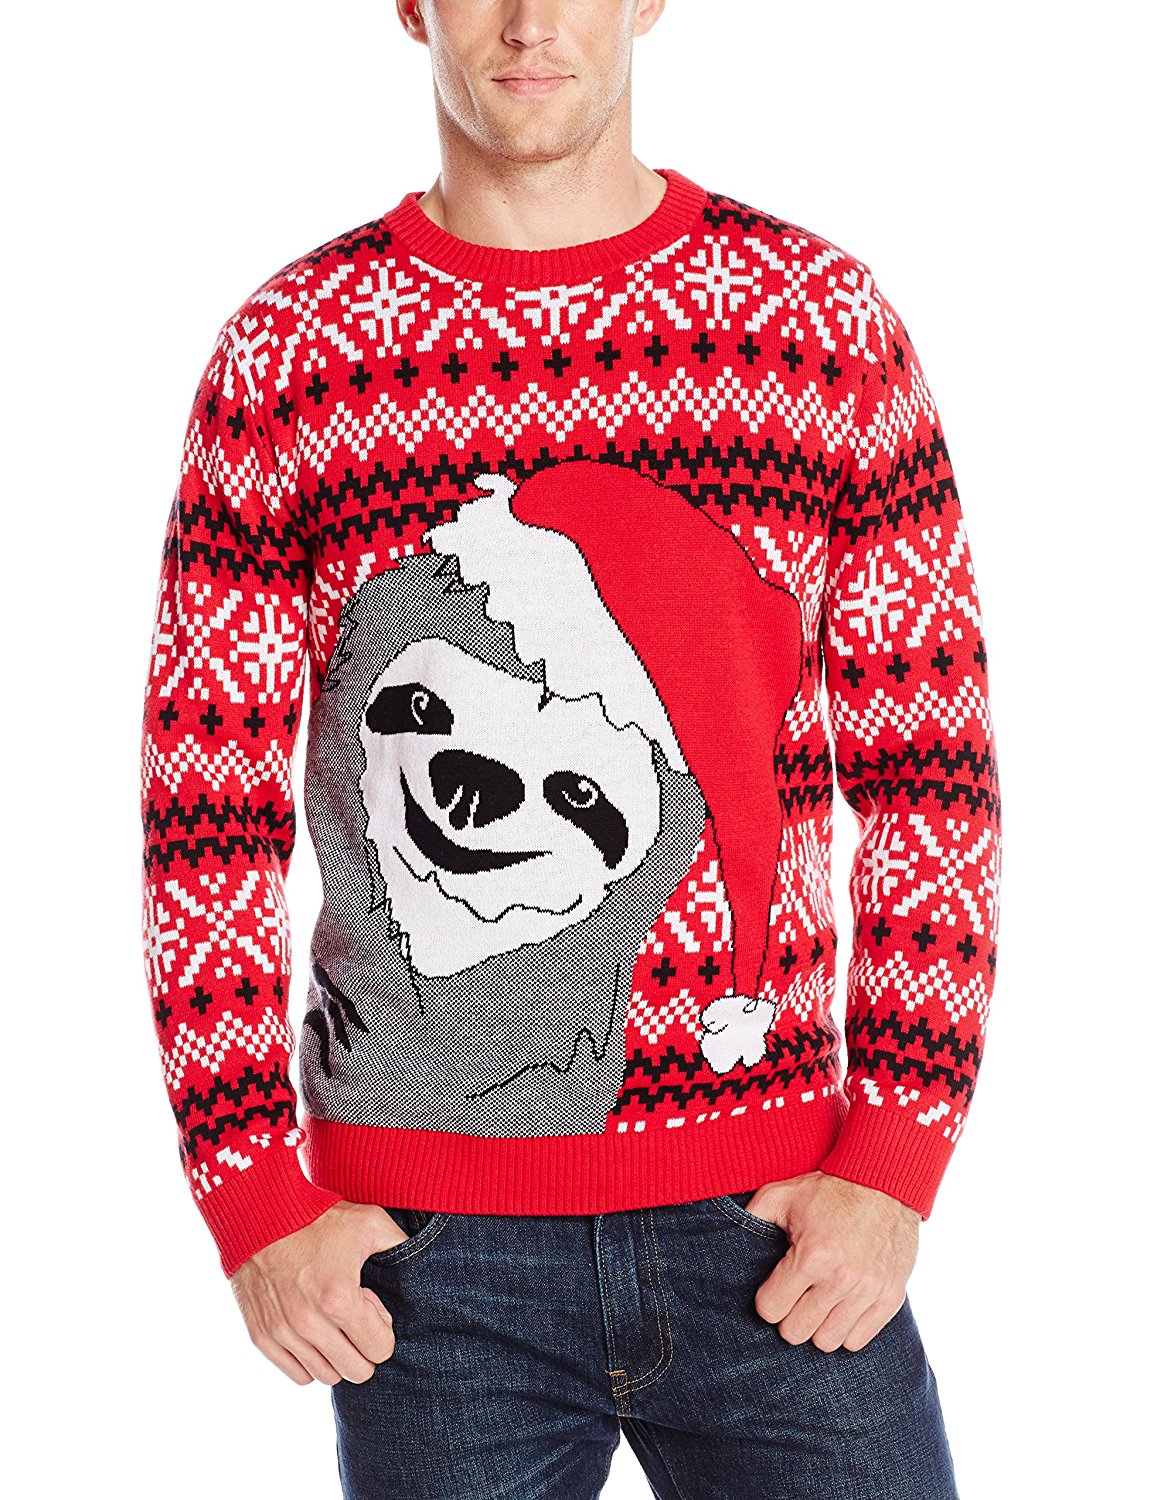 How to style up your Christmas sweaters?